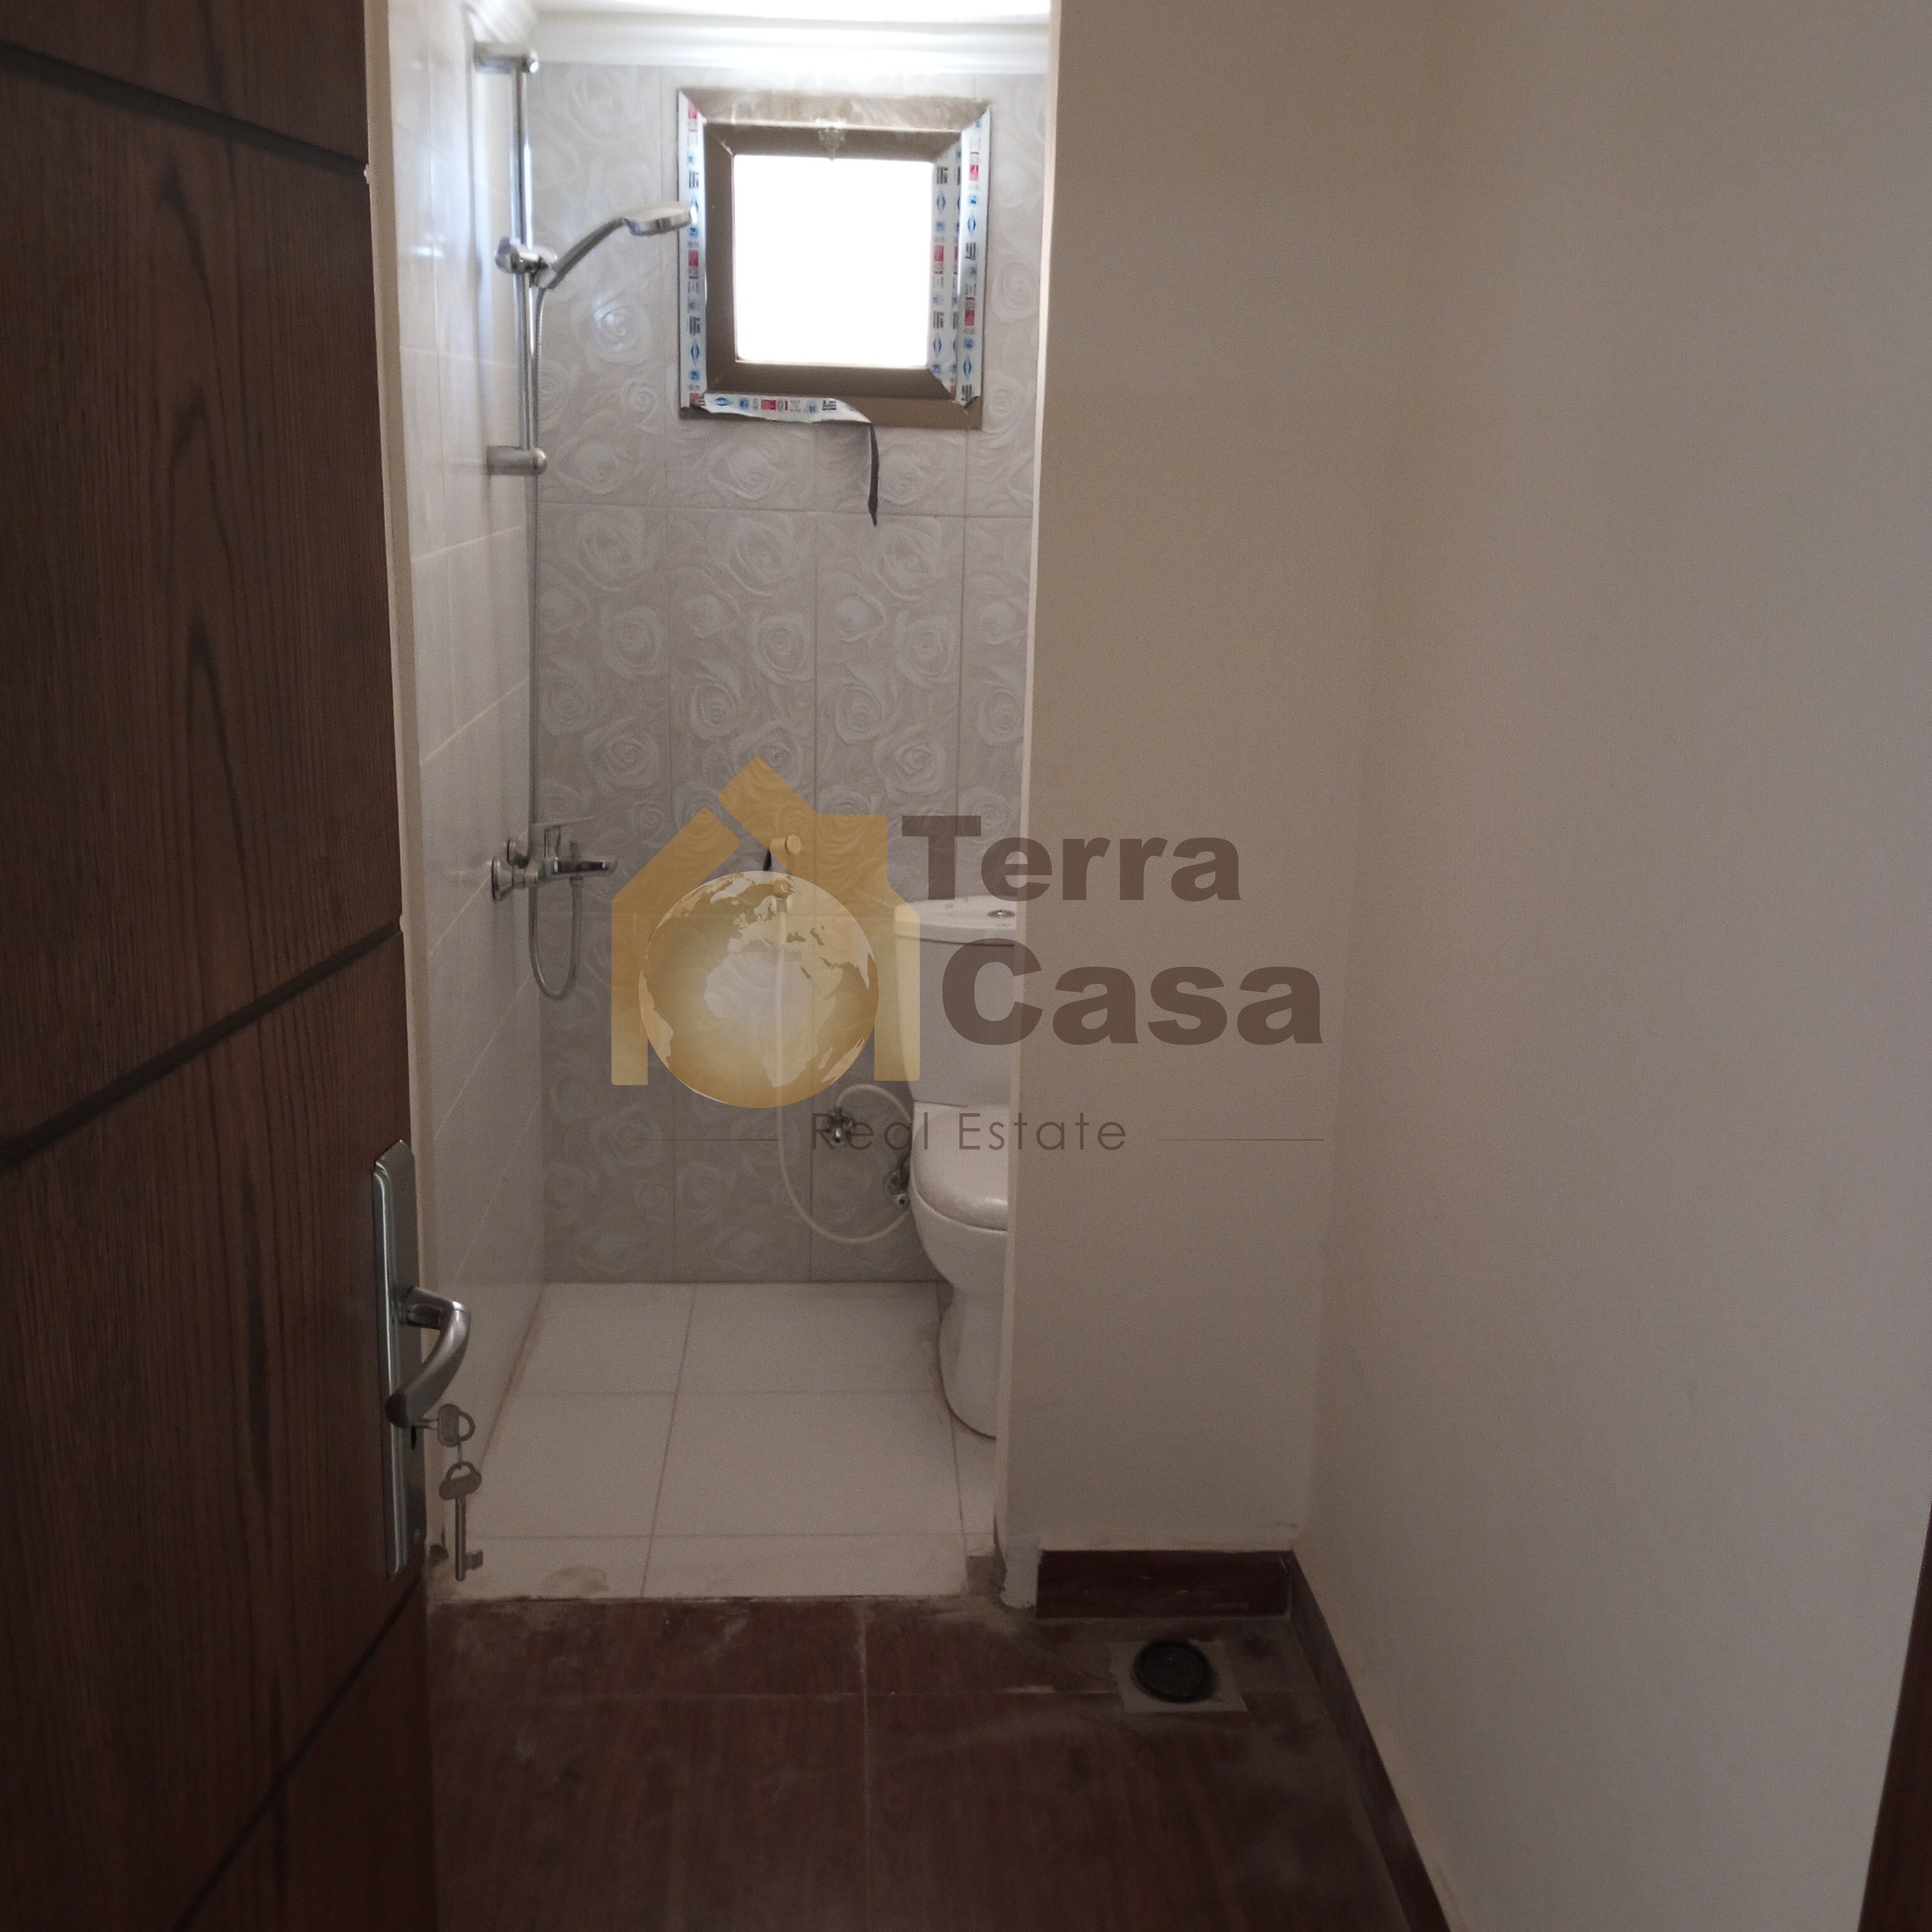 Apartment for sale in zahle qoub elias brand new. Ref#996